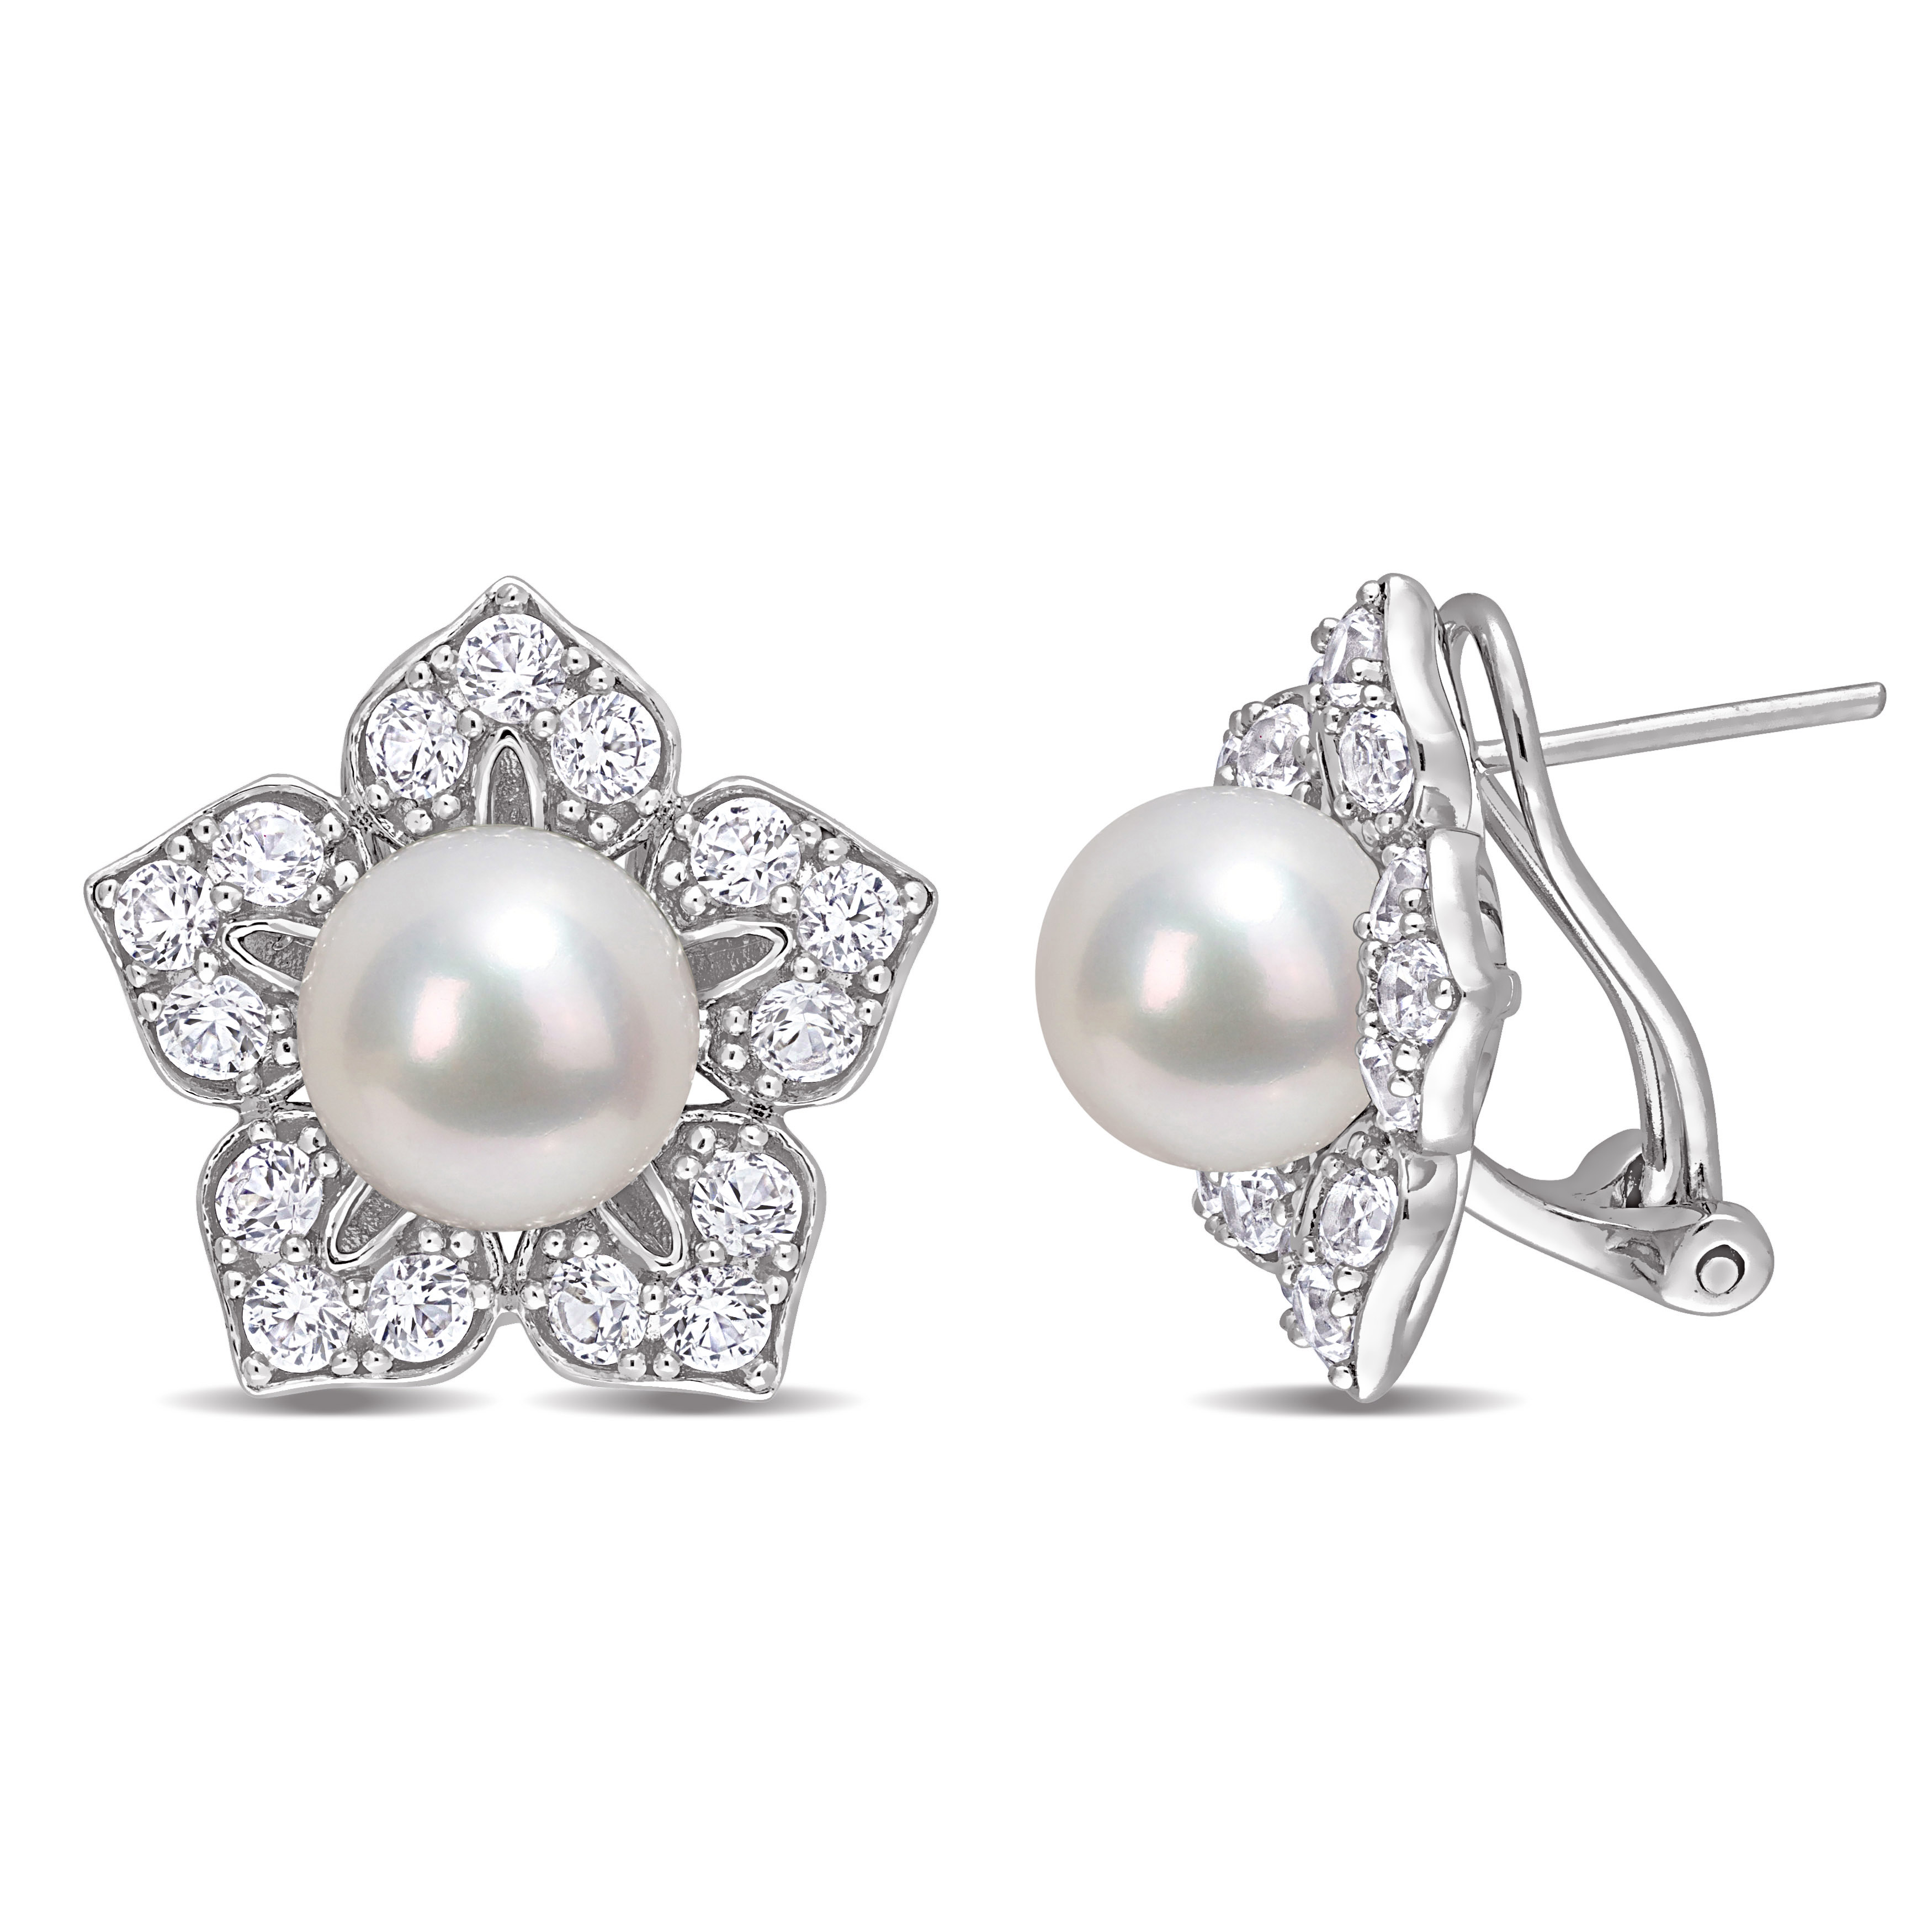 8.5 - 9 MM Freshwater Cultured Pearl and 2 3/4 CT TGW Created White Sapphire Floral Earrings in Sterling Silver